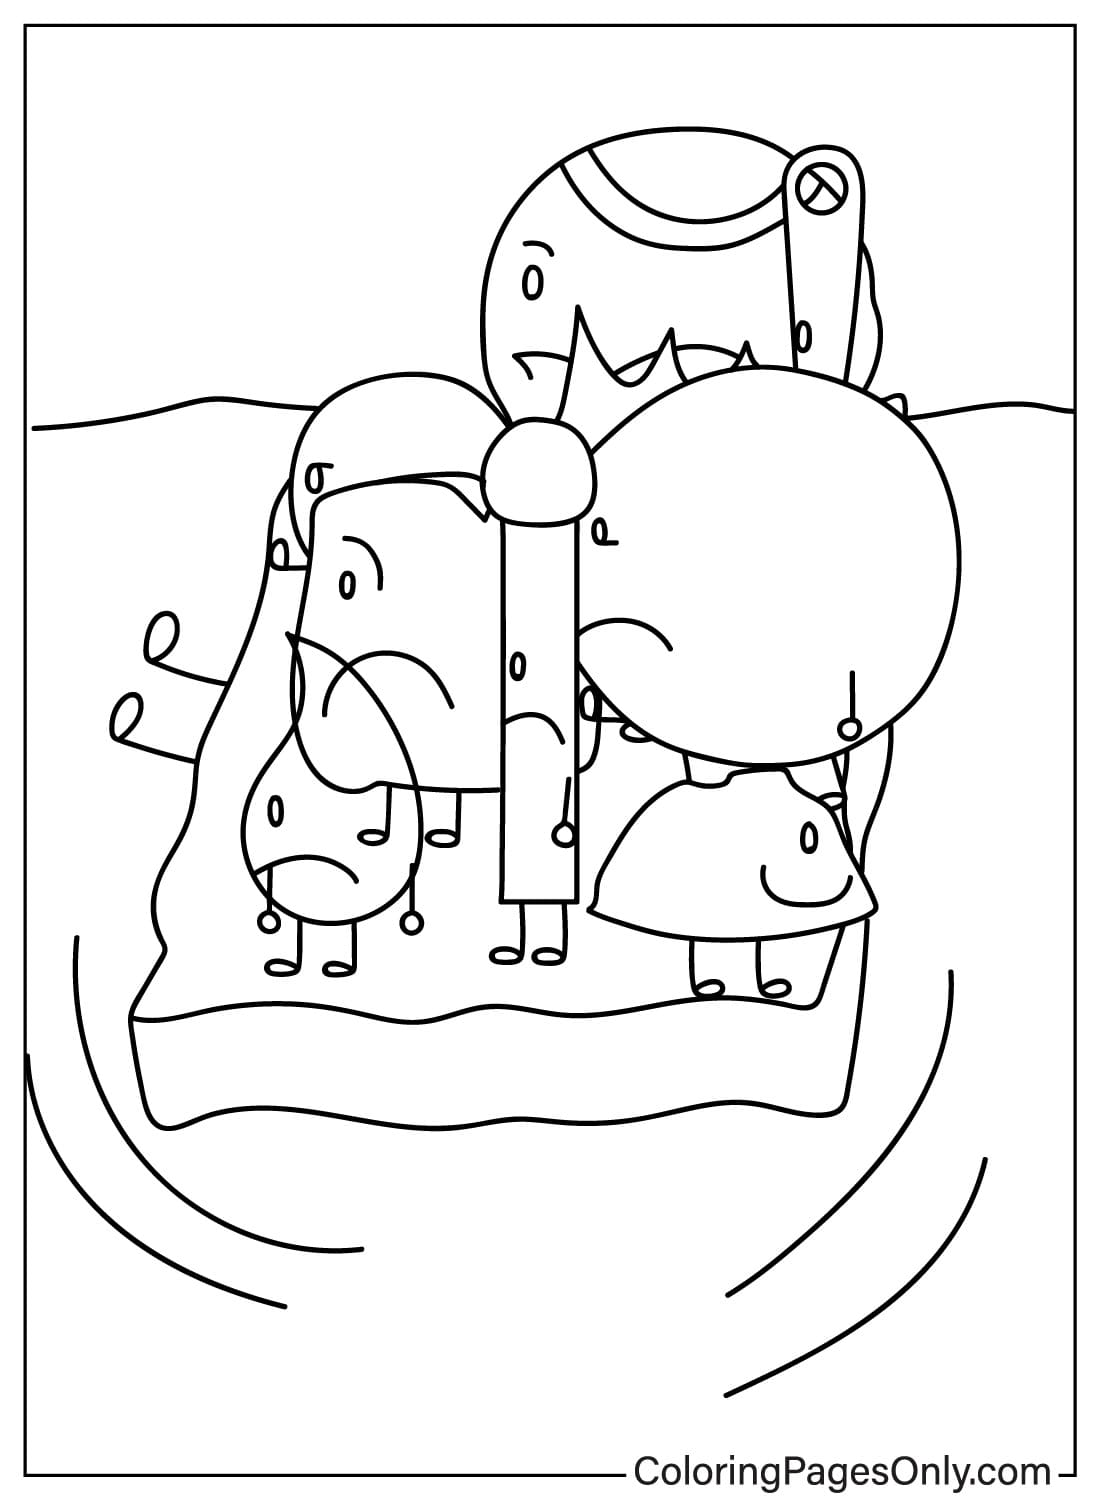 BFDI Coloring Page Printable from Battle for Dream Island